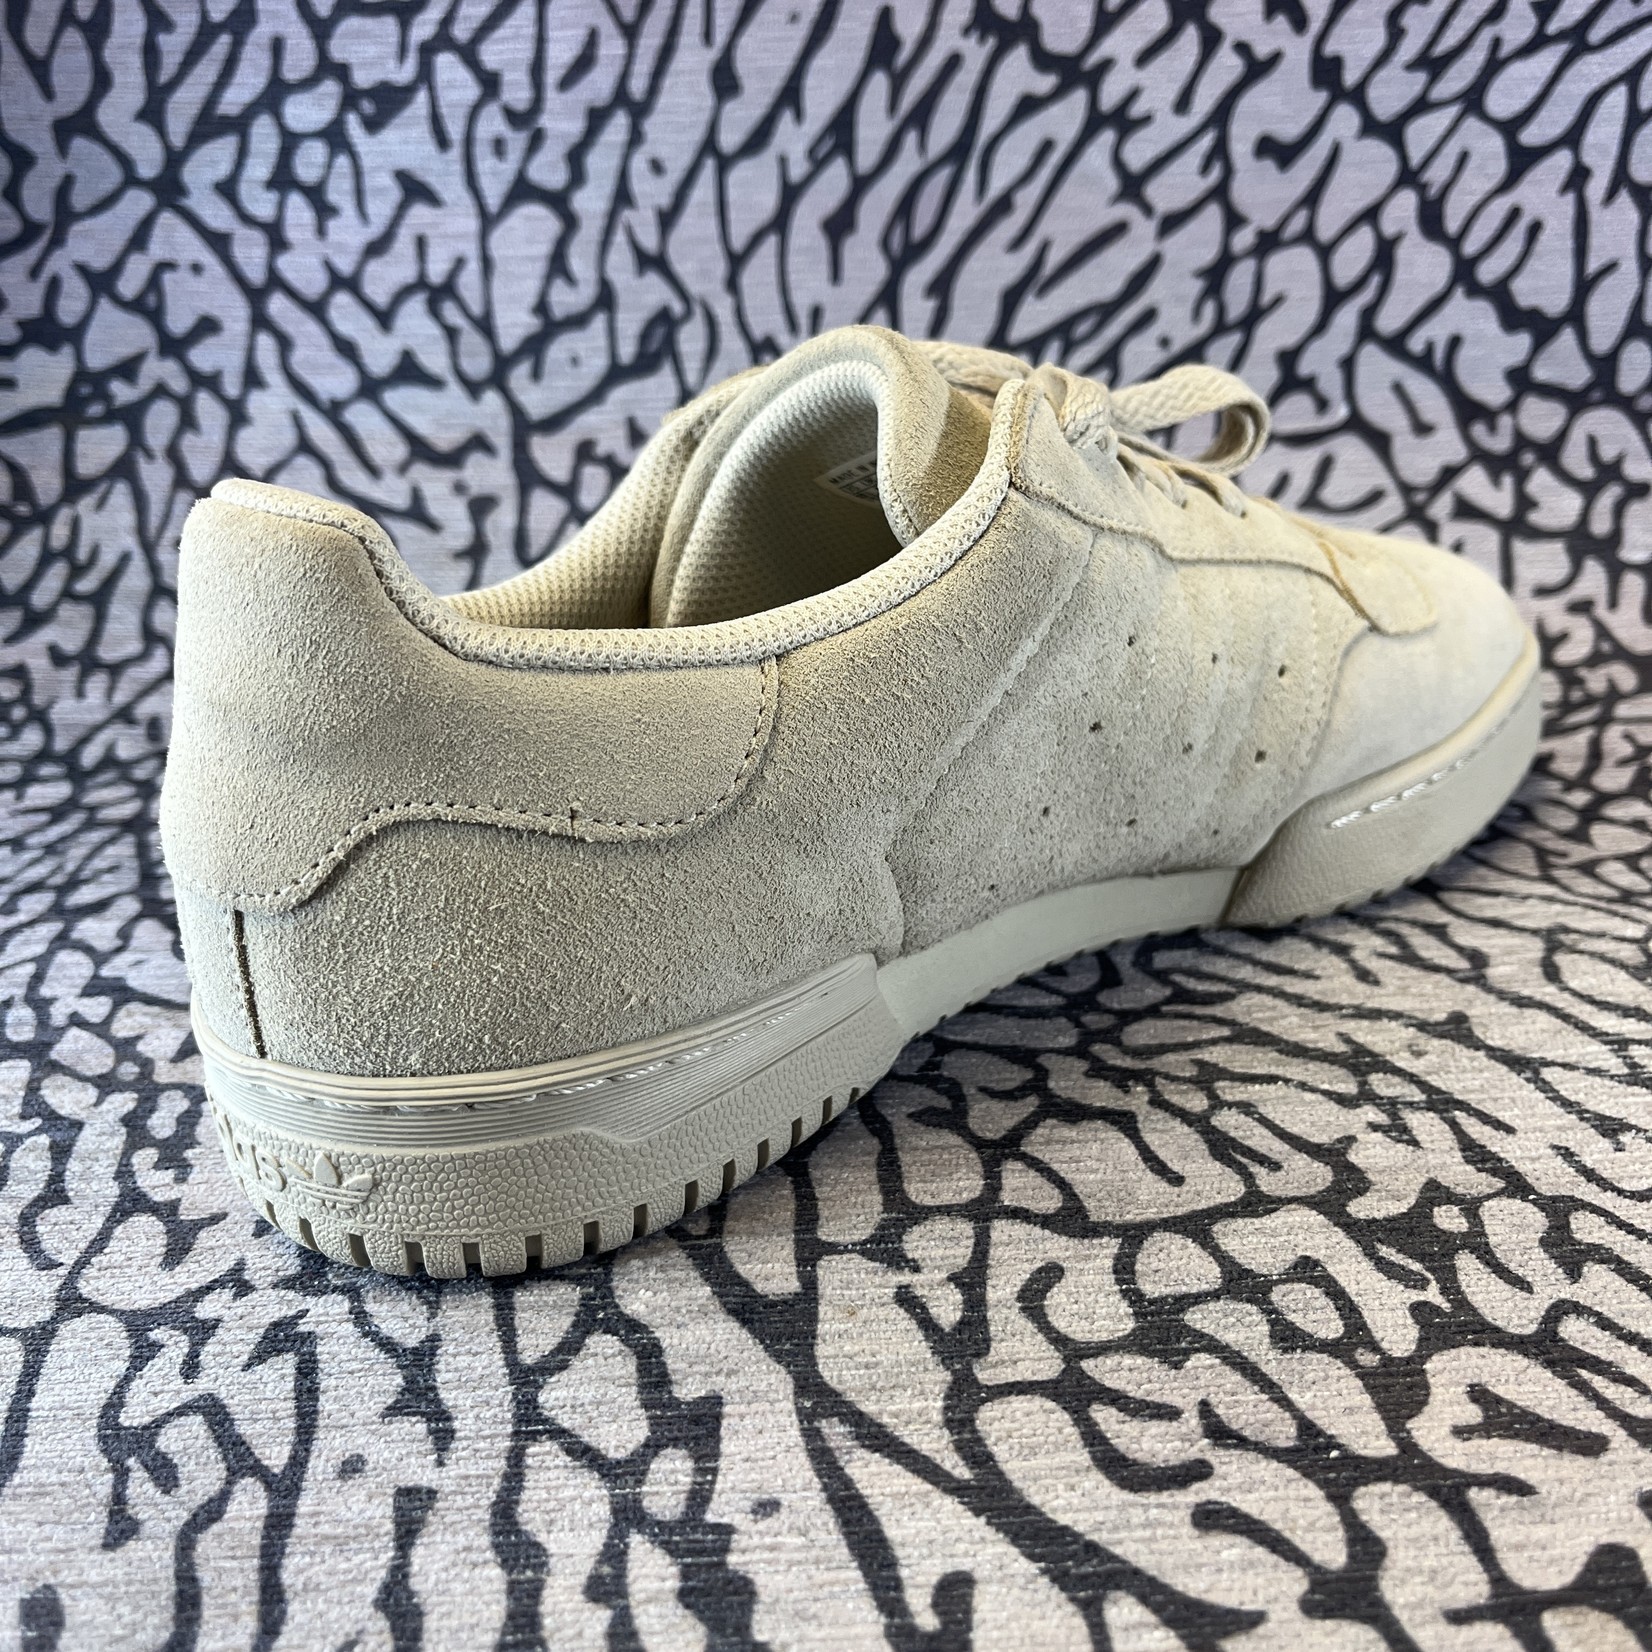 Incubus Insecten tellen Bowling Yeezy Pre-owned Yeezy Powerphase Clear Brown - Lavish Life Sneakers